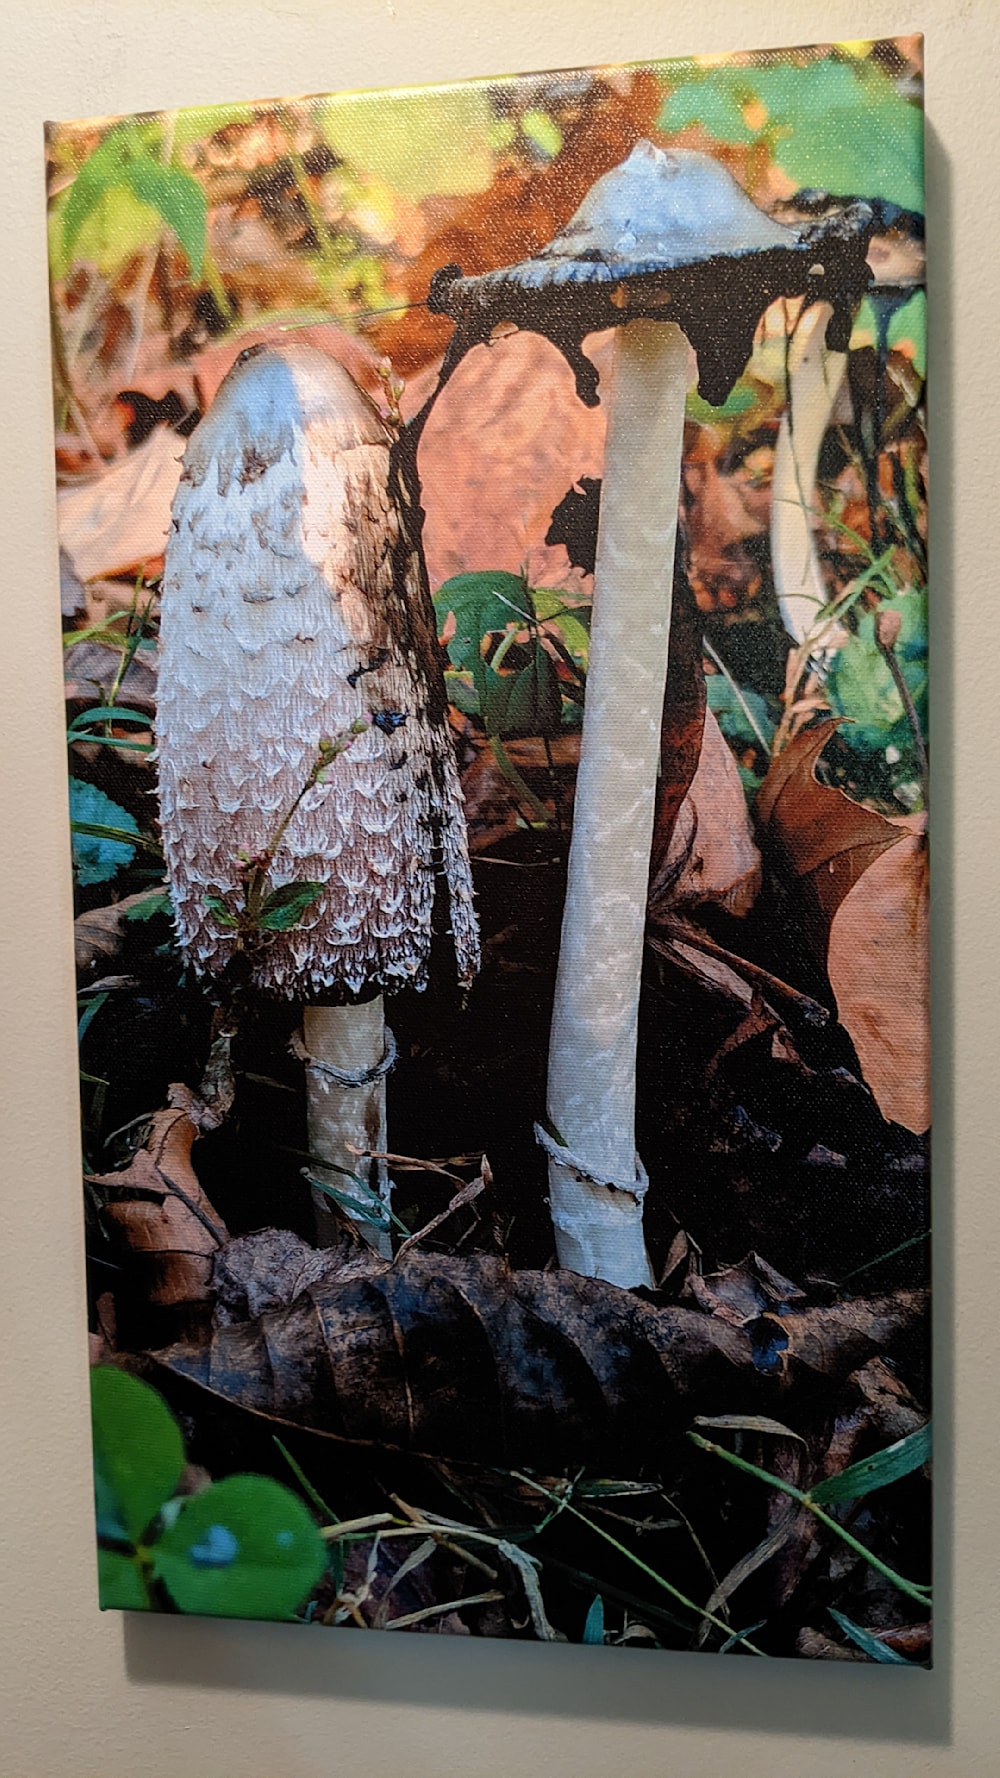 The Odd Couple, two odd mushrooms together on gallery wrapped canvas